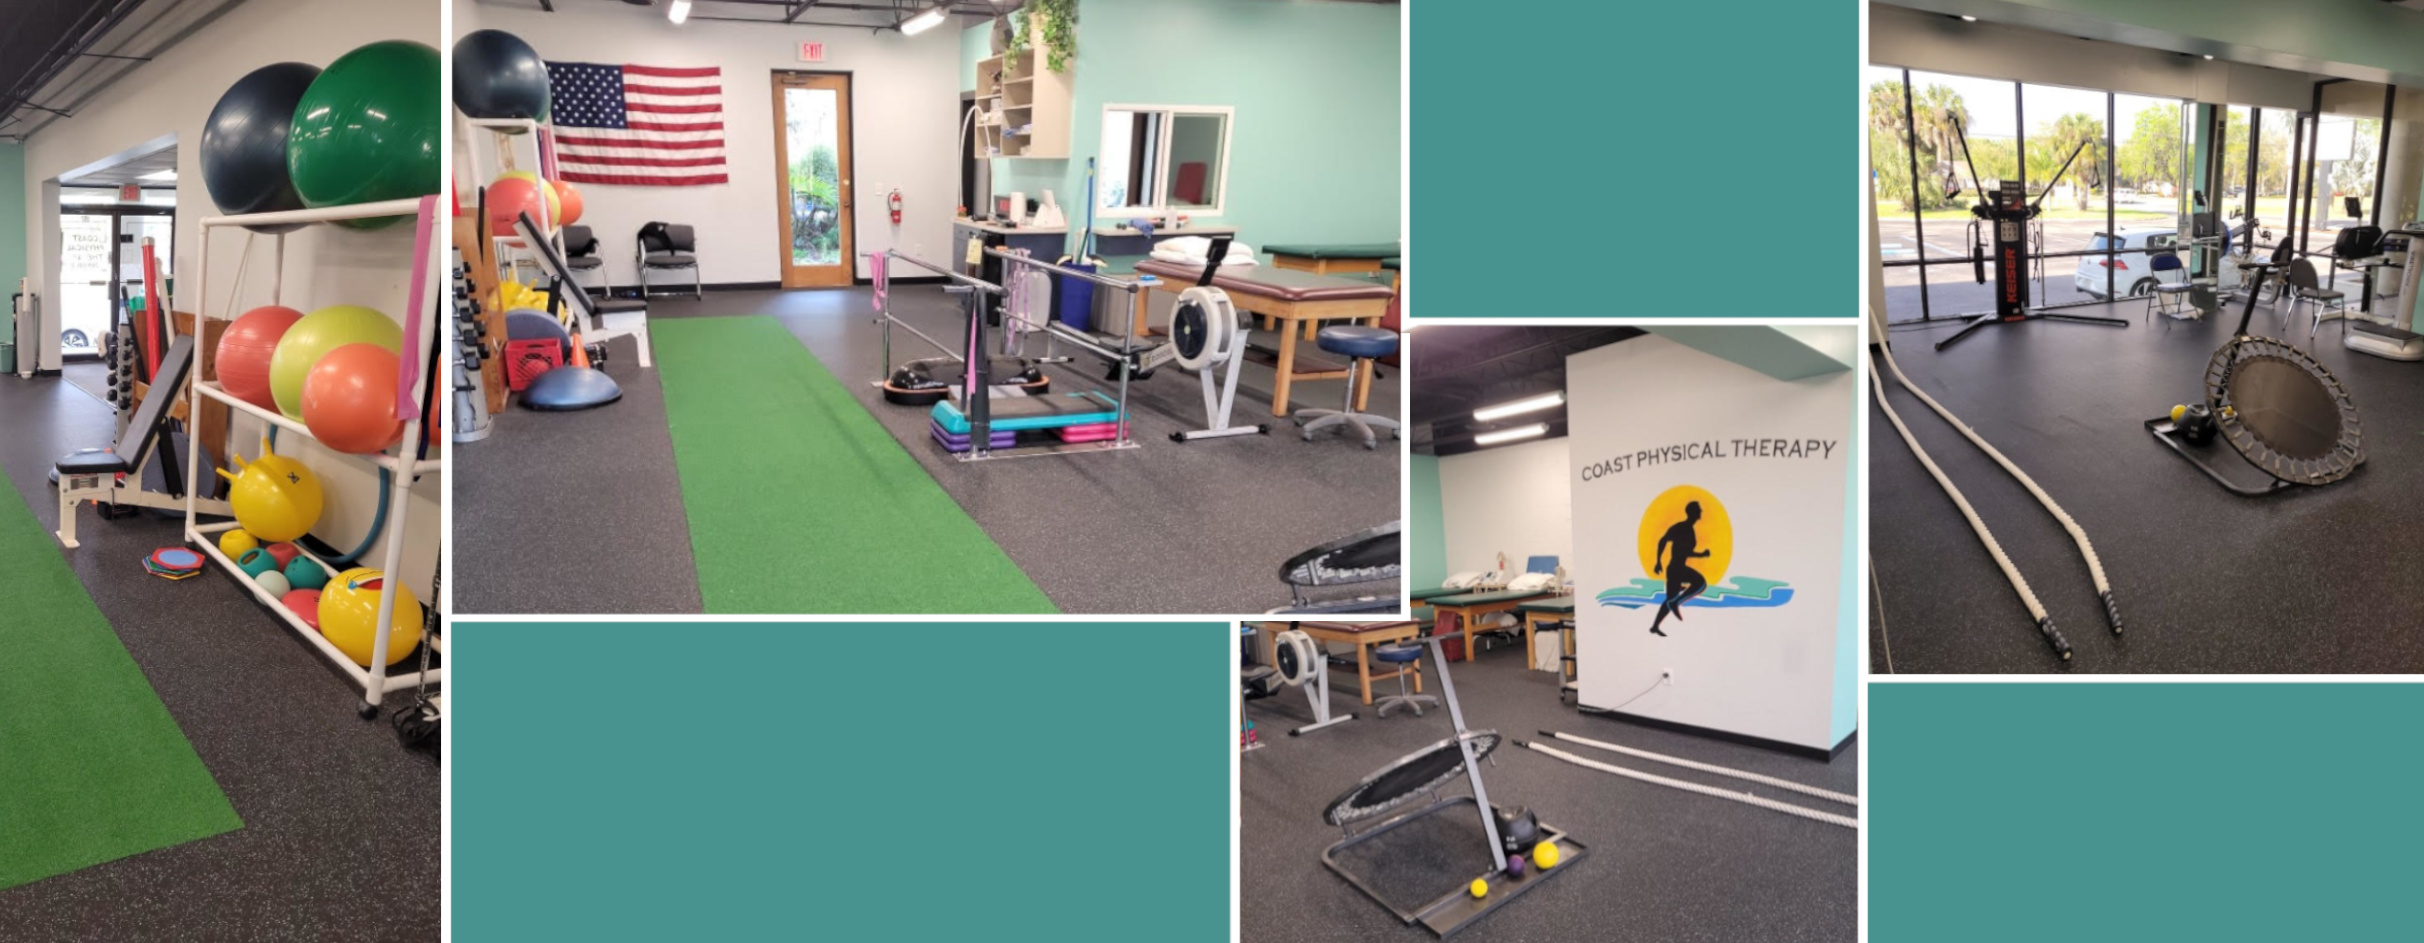 Coast Physical Therapy's New Gym Expansion